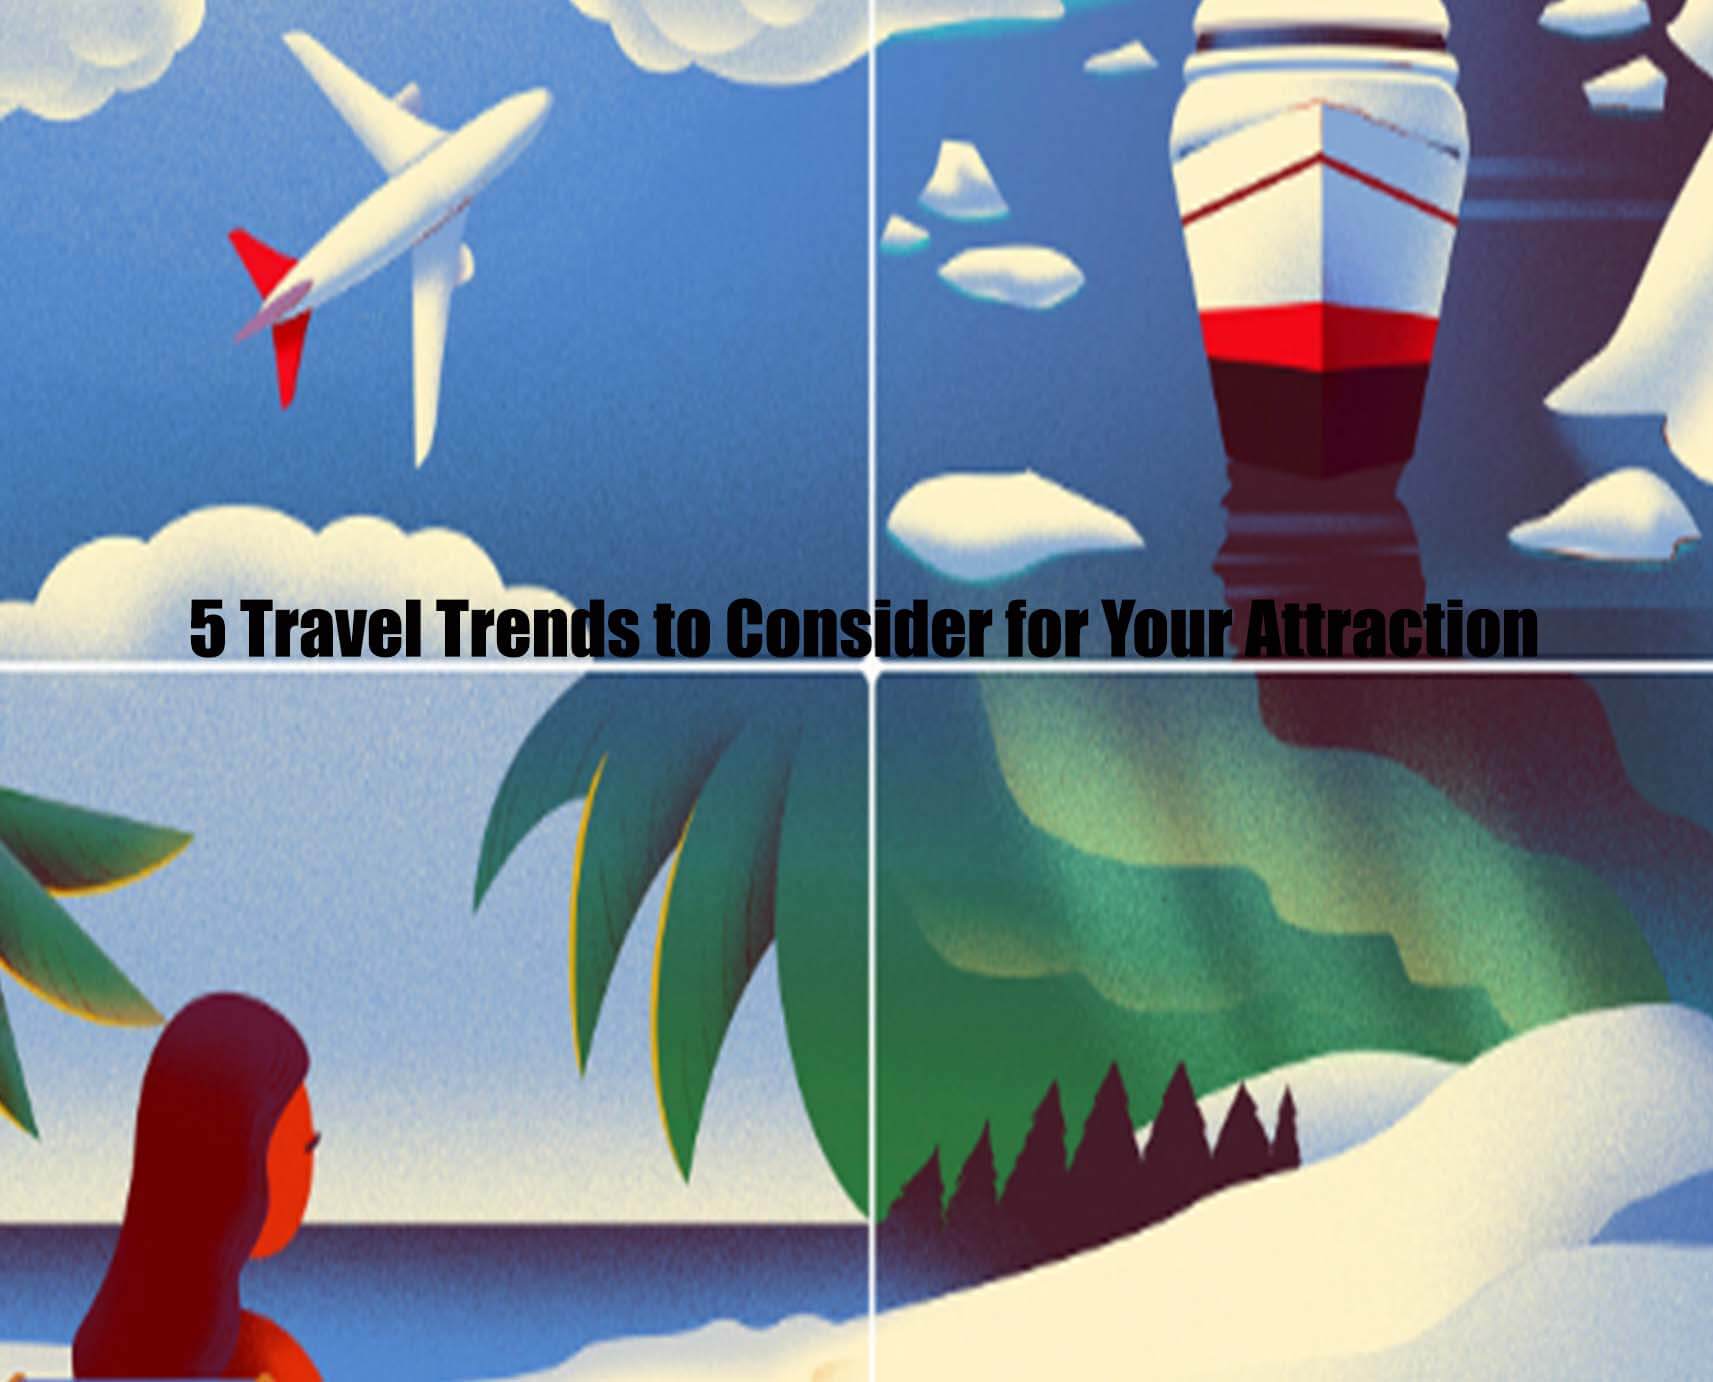 5 Travel Trends to Consider for Your Attraction